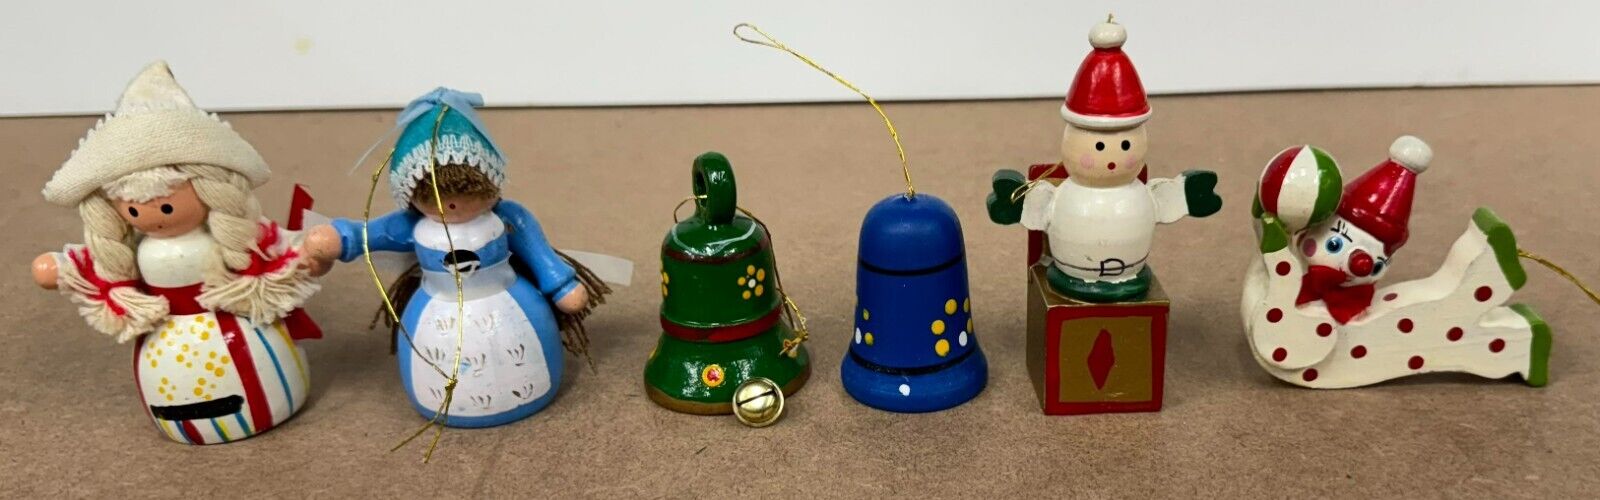 Vintage Lot Of 6 Painted Wooden Christmas Ornaments Bell, Jack in the box, clown